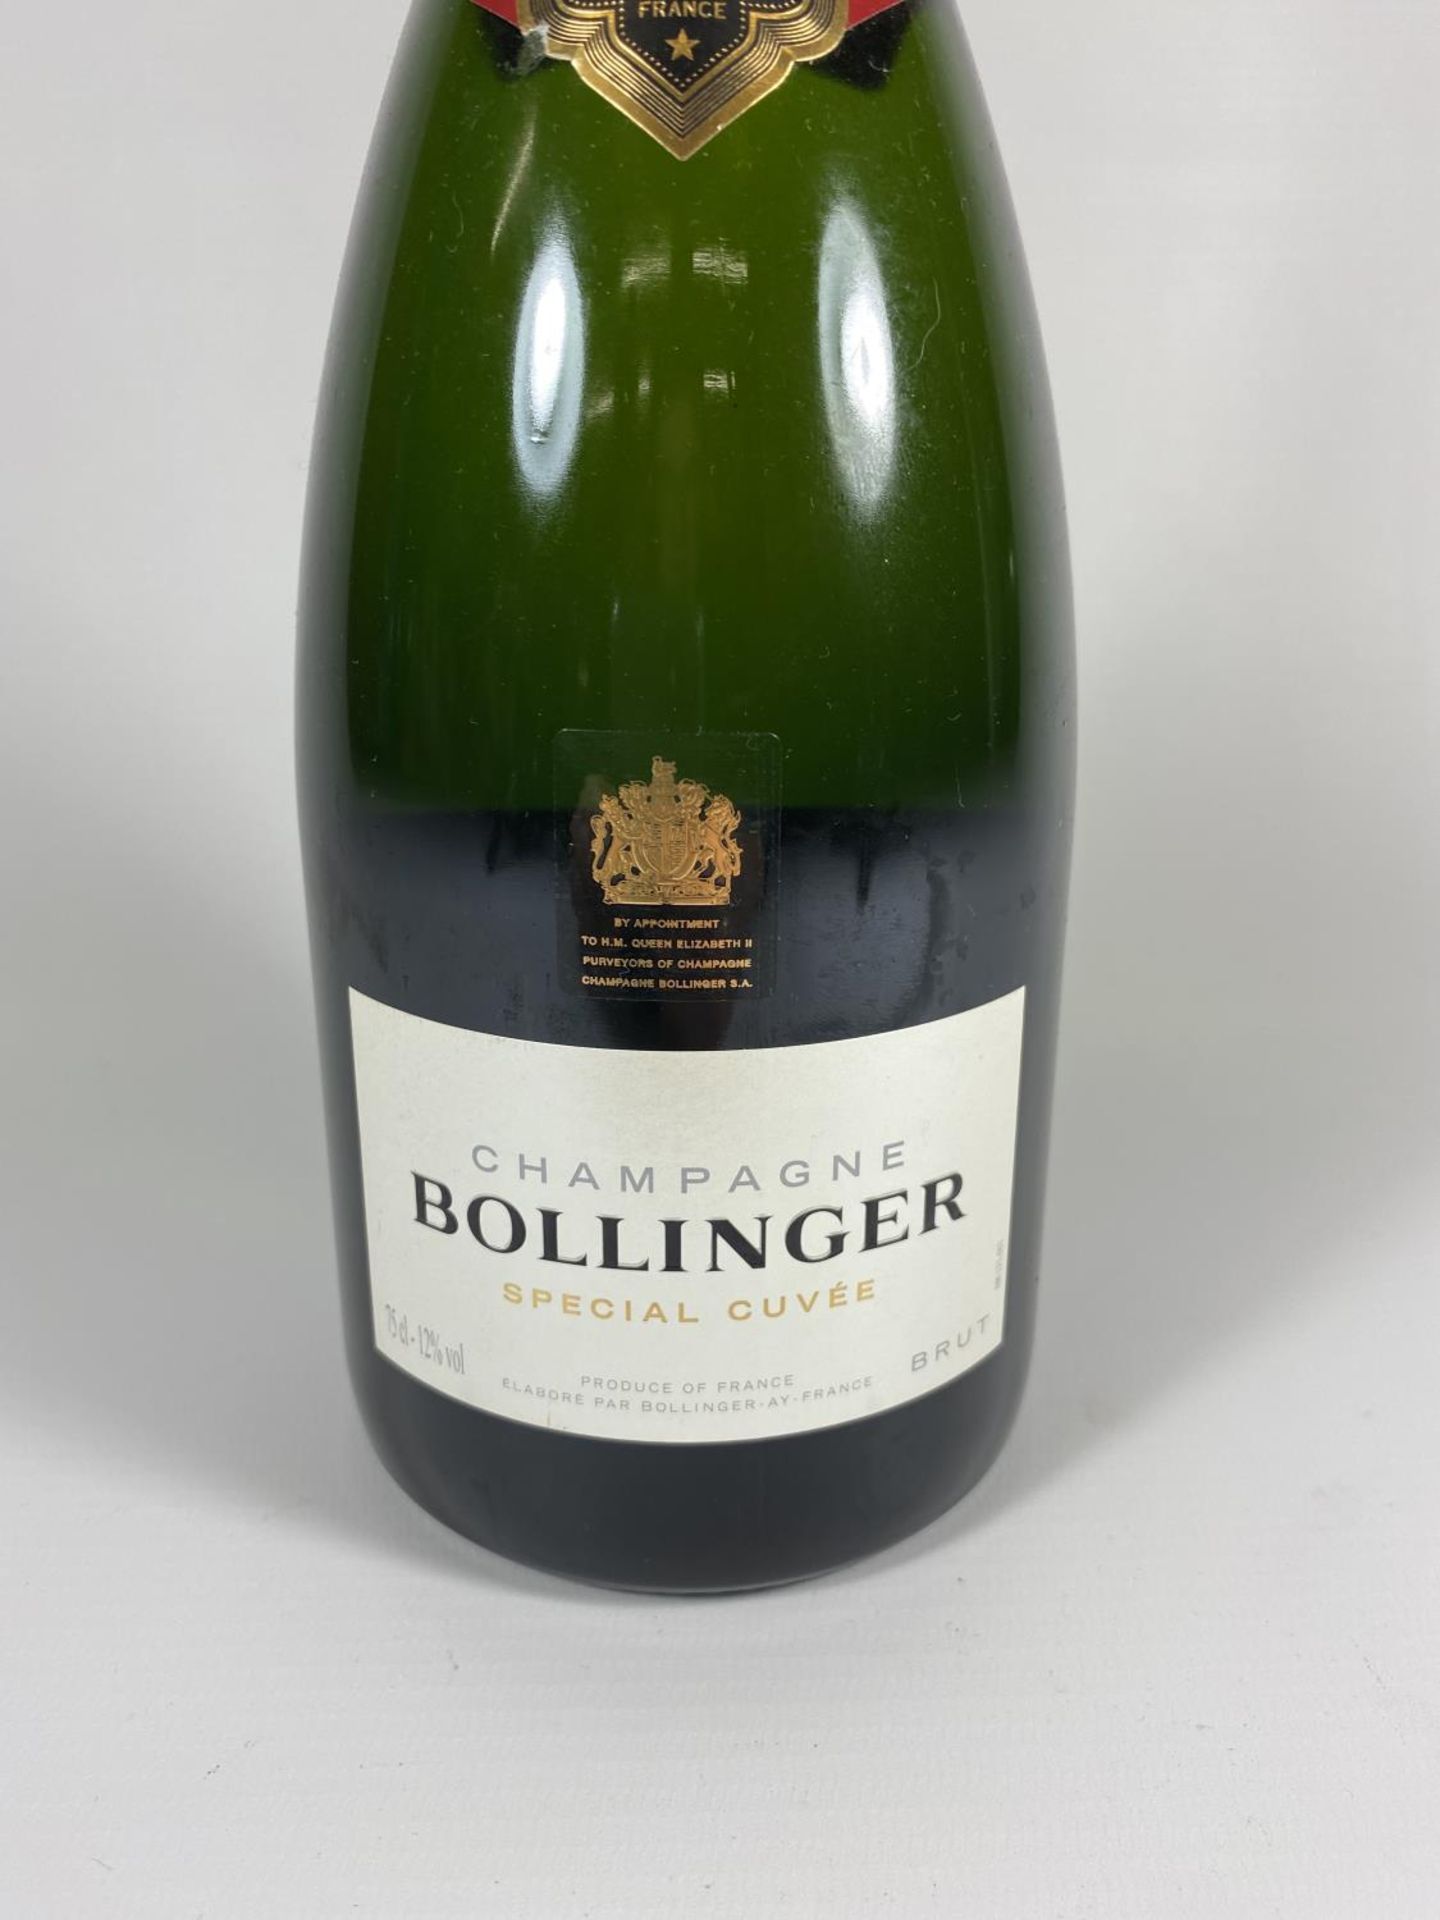 1 X 75CL BOTTLE - BOLLINGER SPECIAL CUVEE CHAMPAGNE - Image 2 of 3